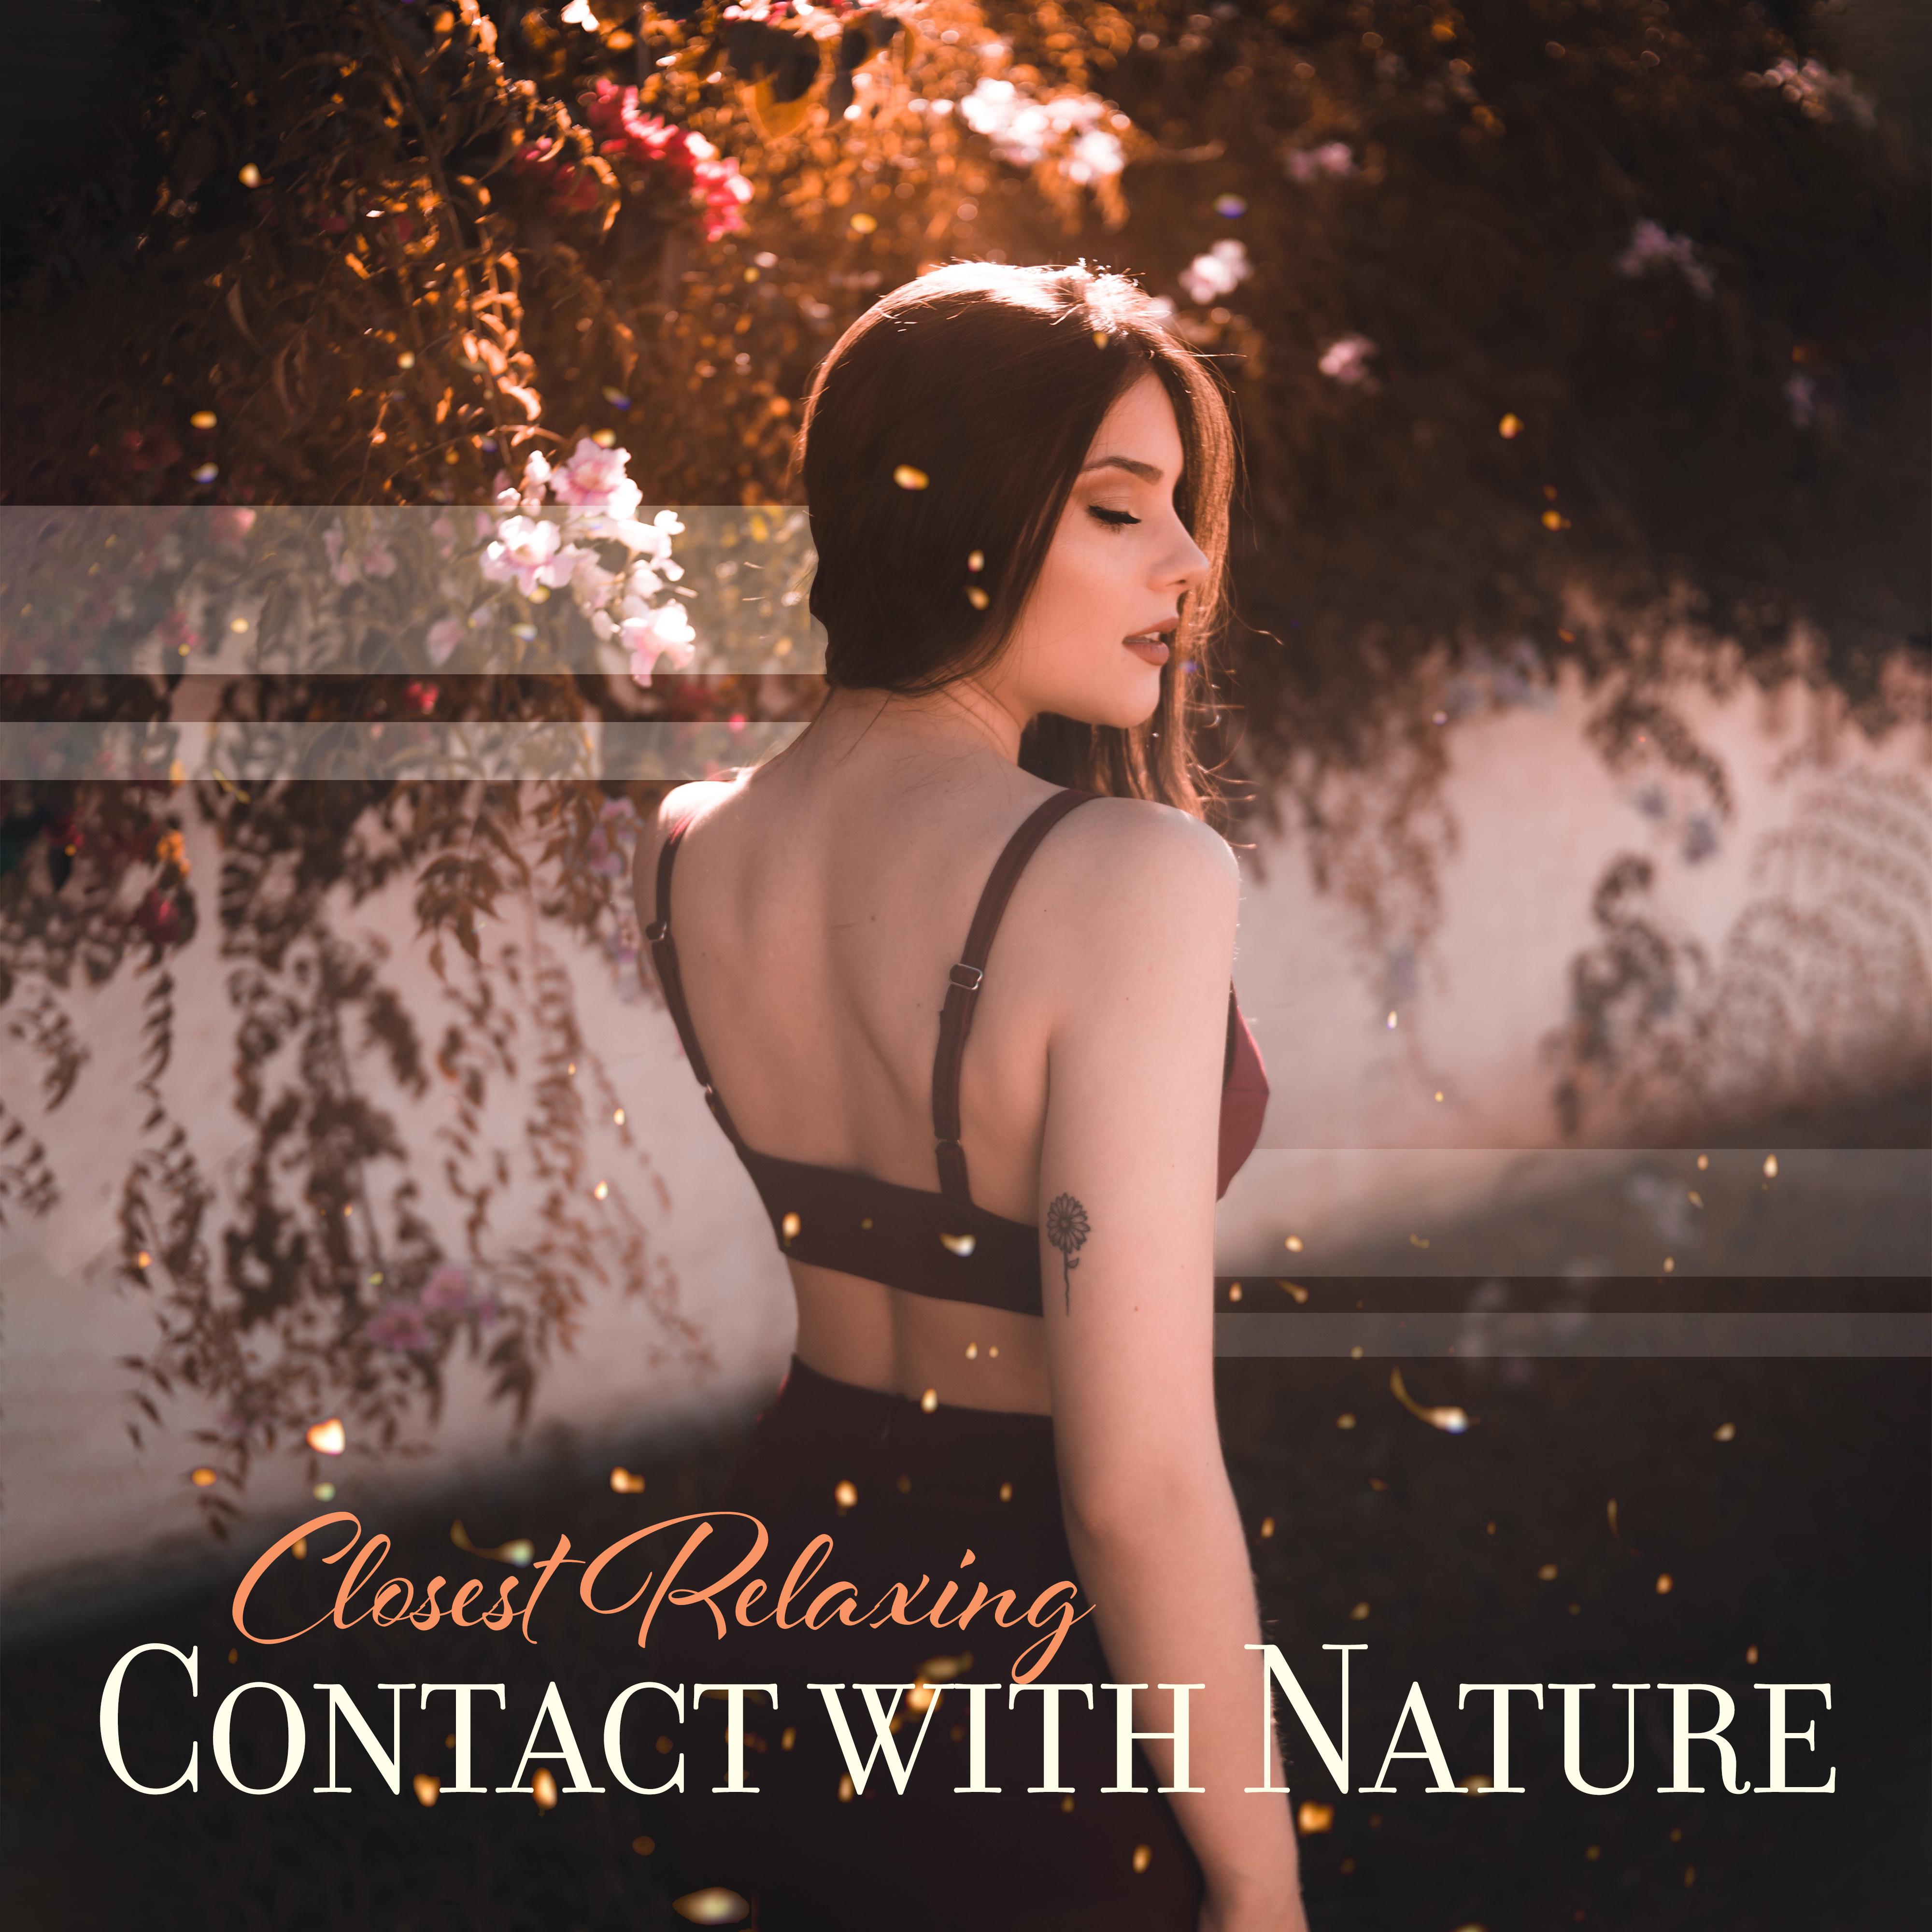 Closest Relaxing Contact with Nature: 2019 New Age Nature Piano Music Mix for Best Relax, Calm Down & Rest, Stress Relief, Fight with Bad Thoughts